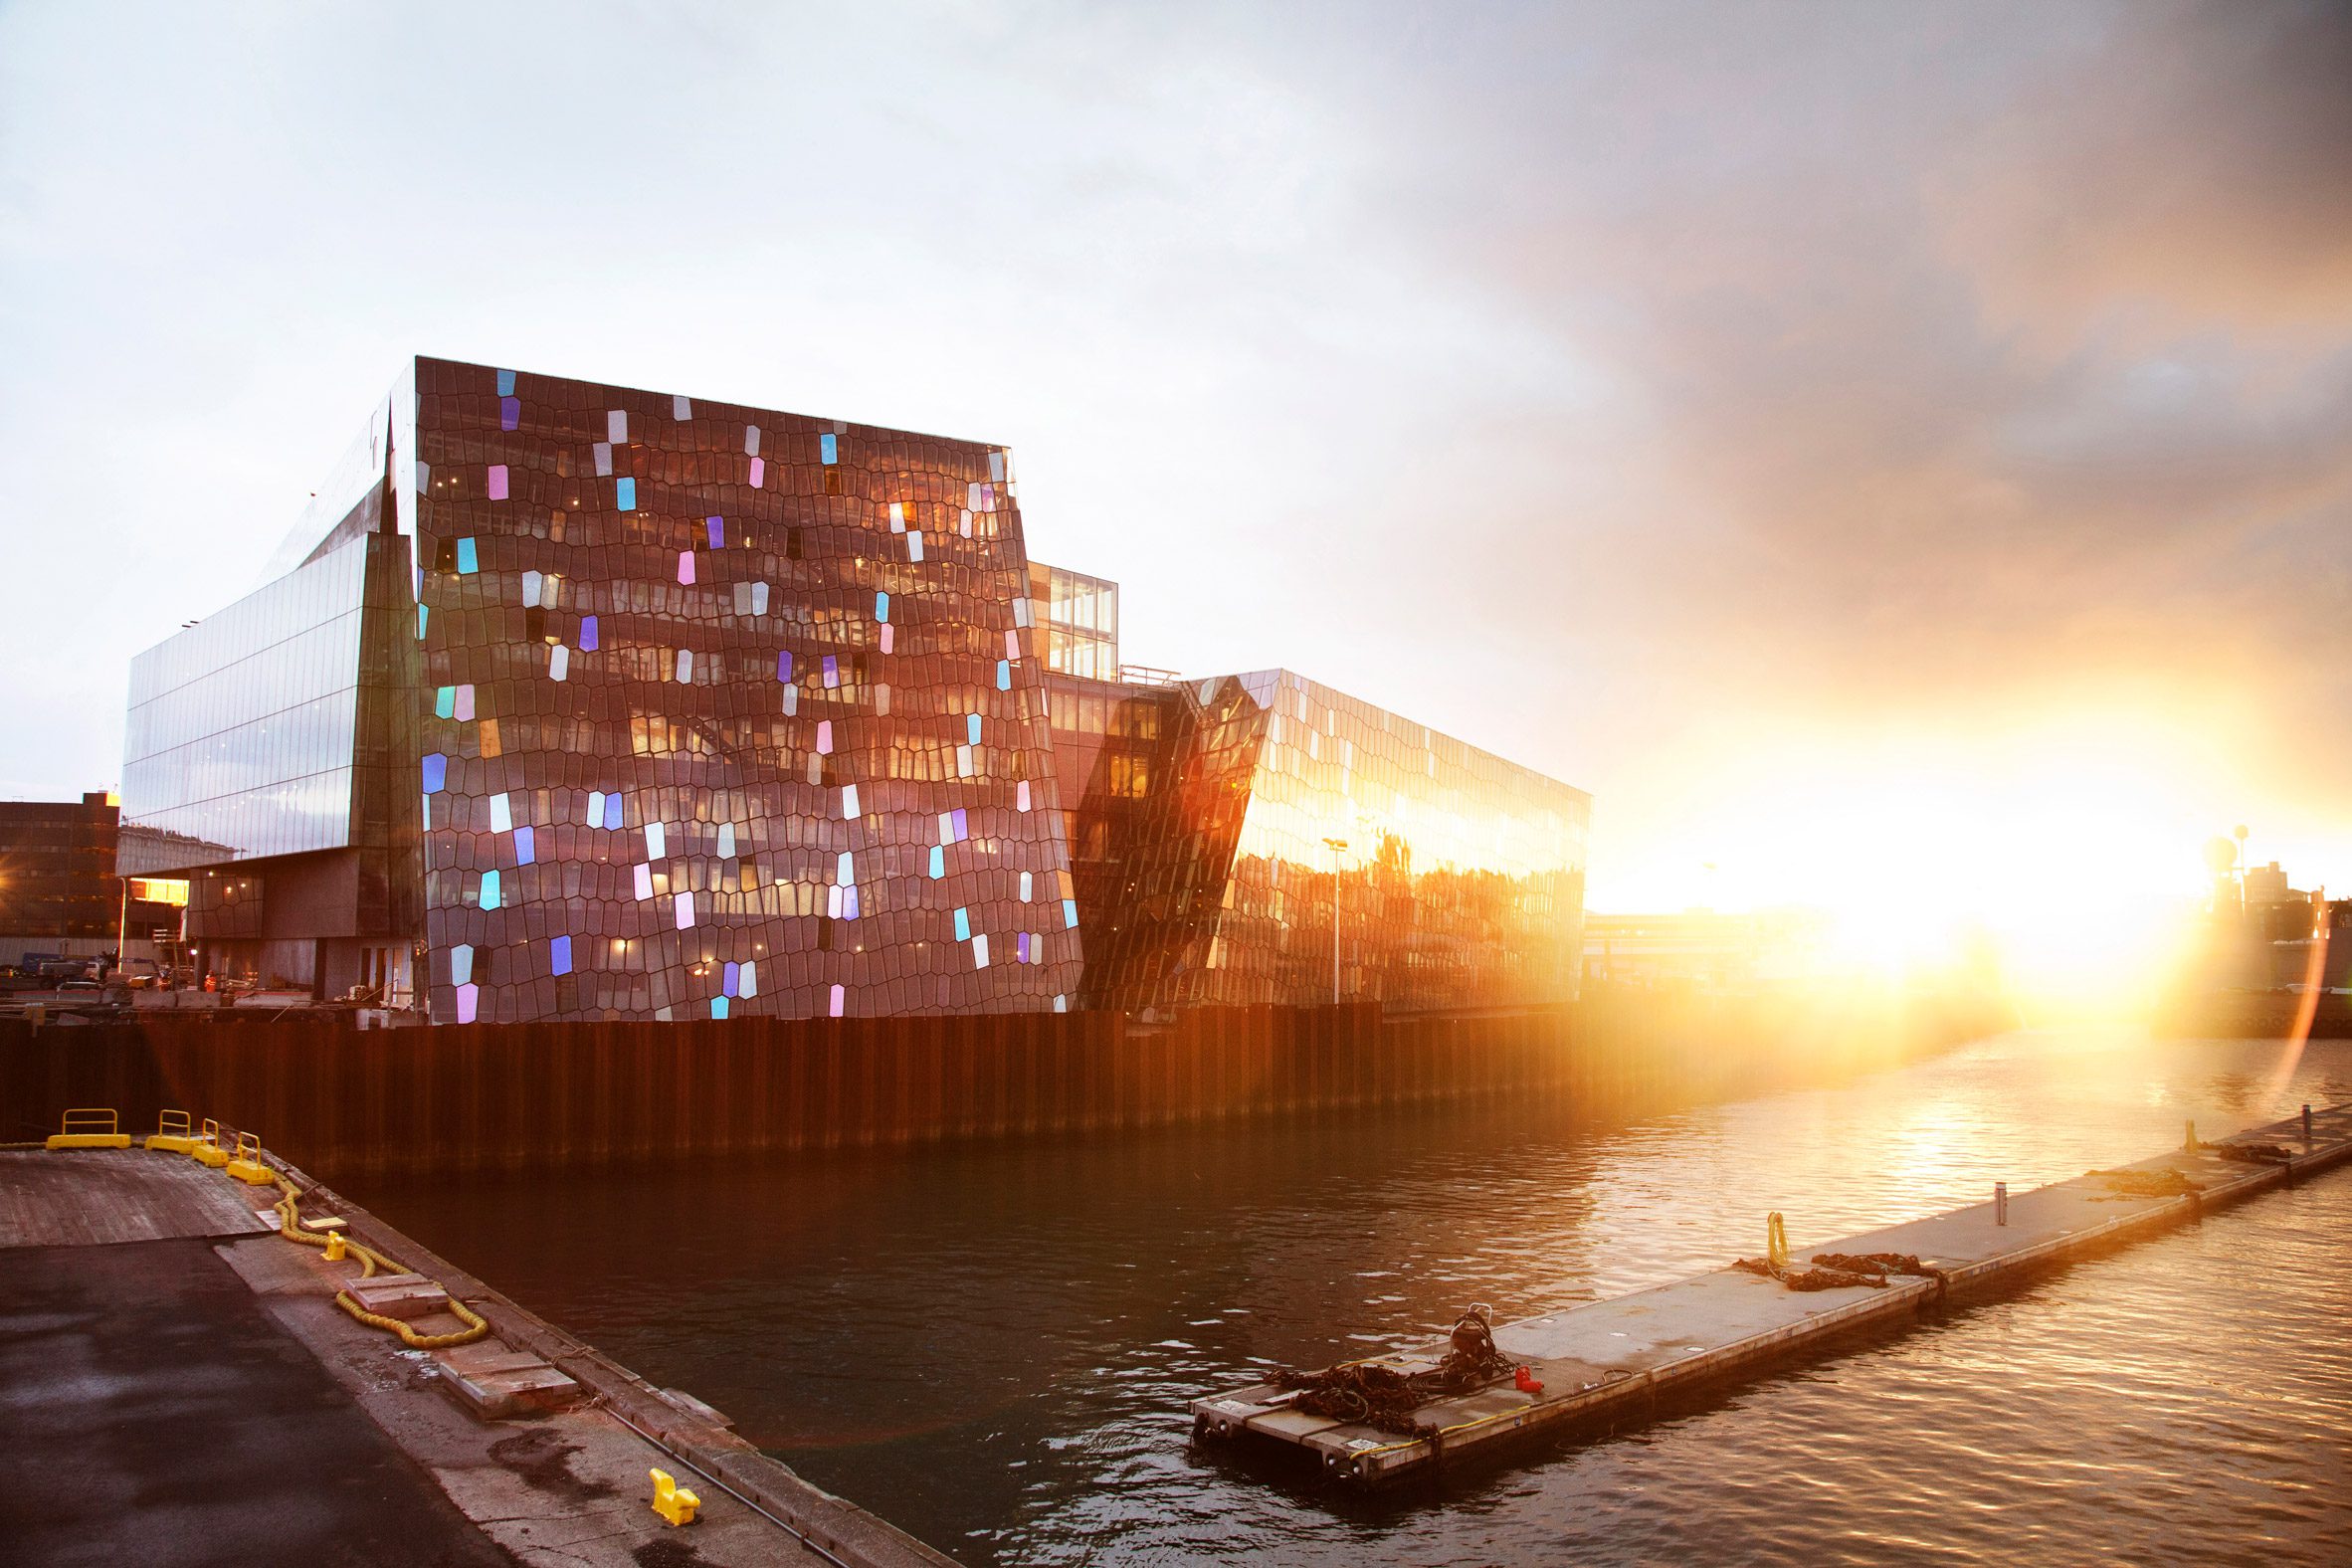 Harpa Concert Hall and Conference Centre by Henning Larsen Architects in Reykjavík, Iceland